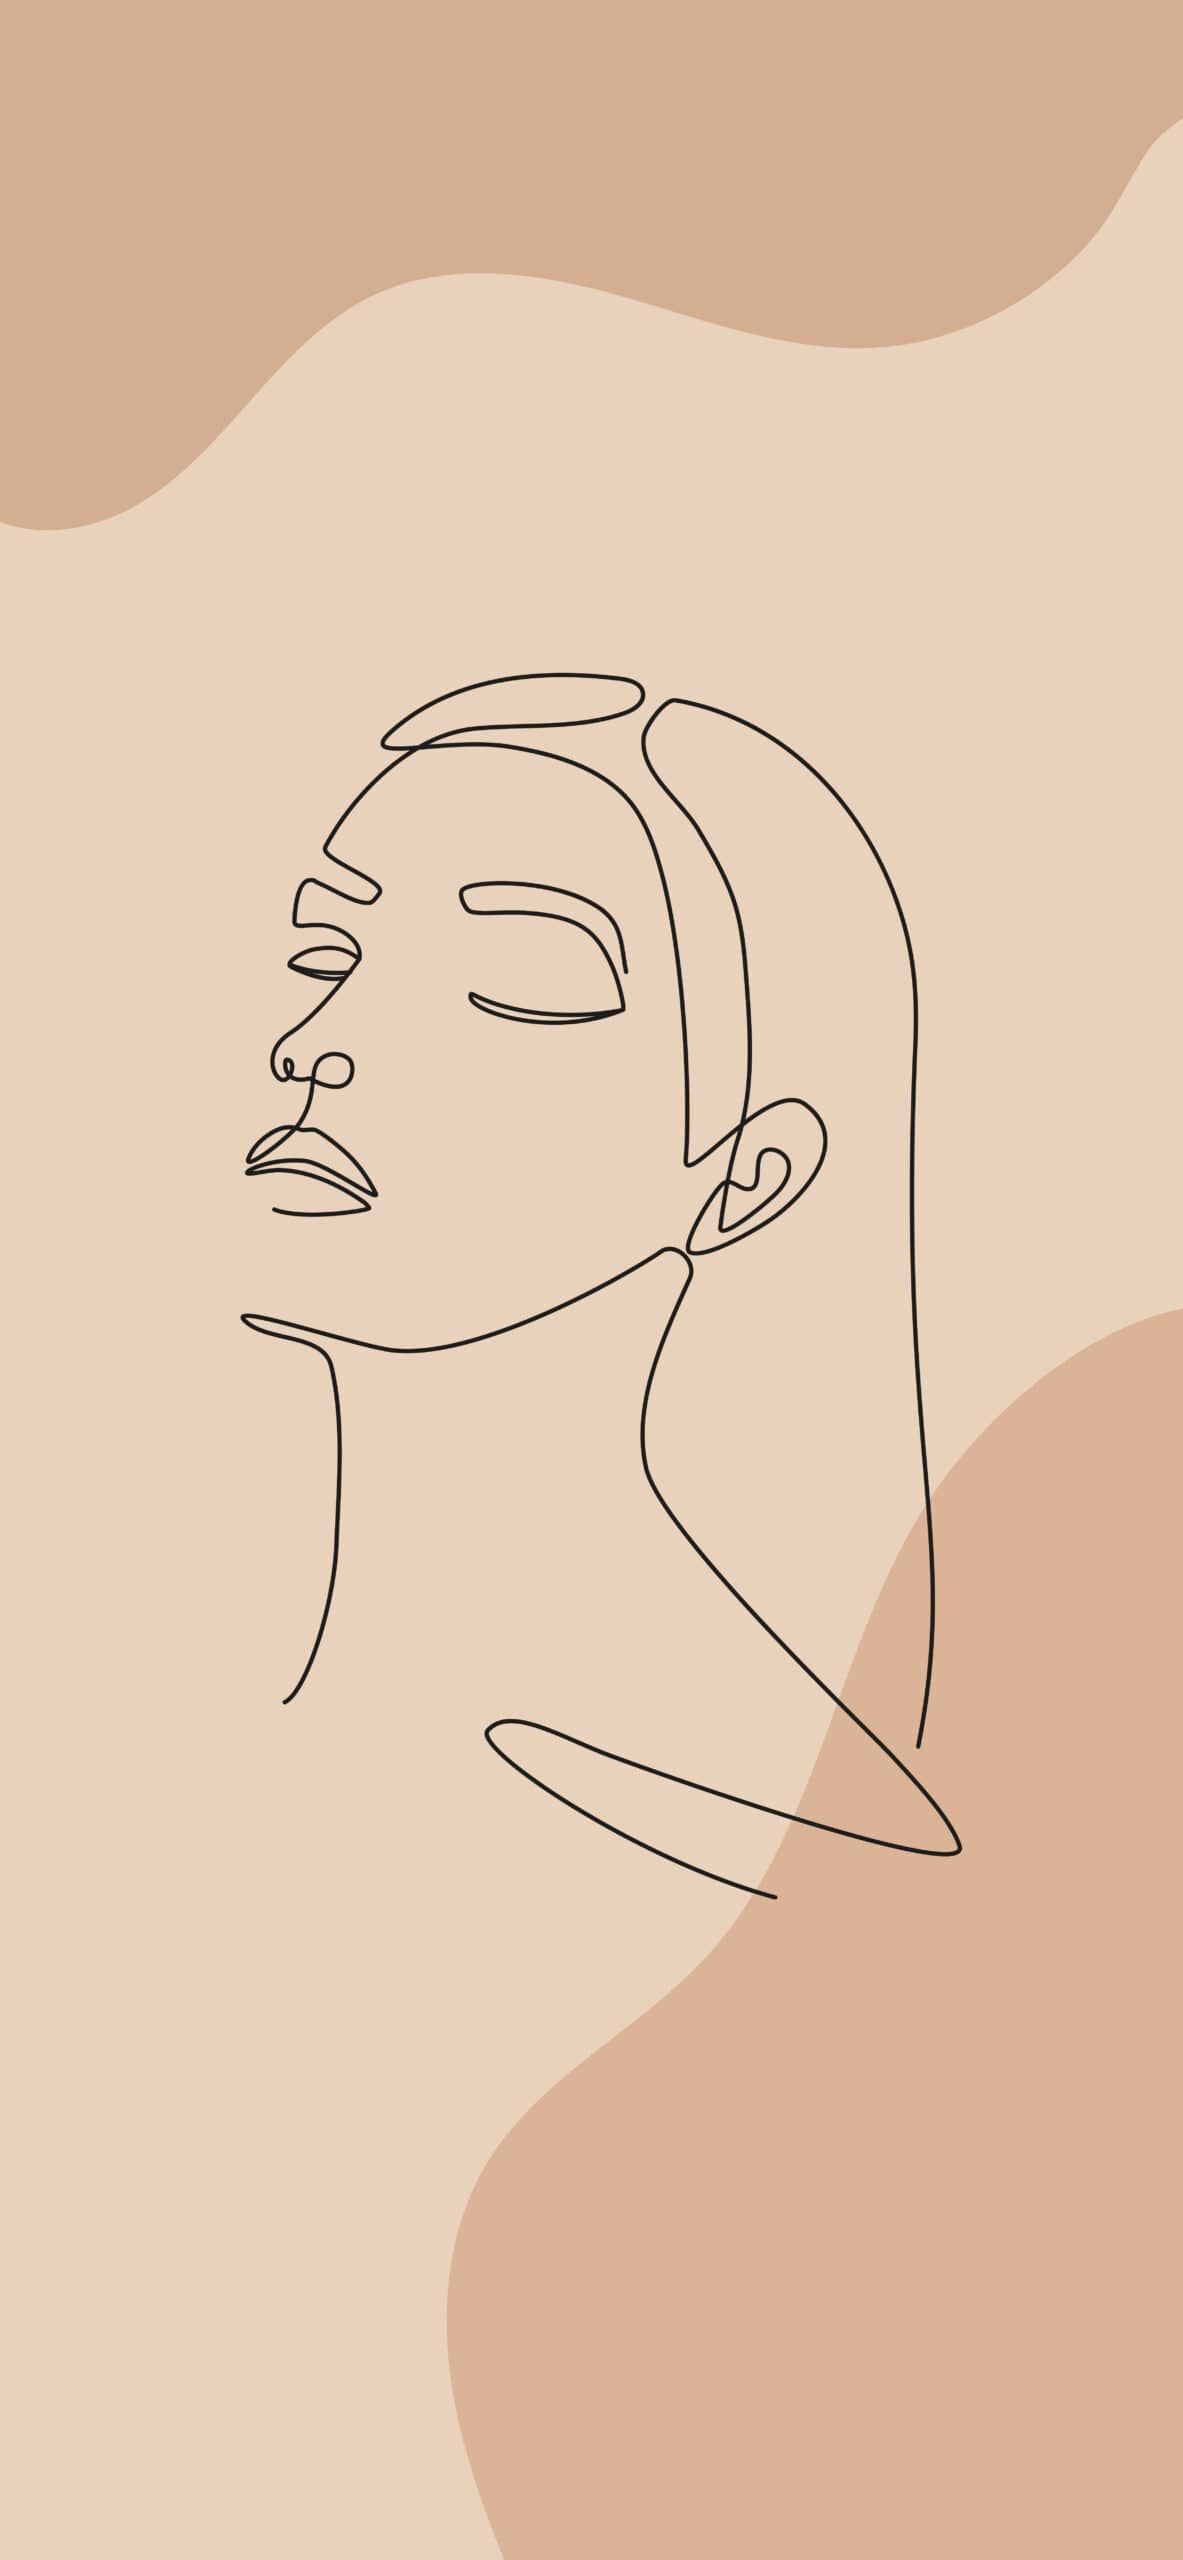 Premium Vector  One line drawing woman portrait banner aesthetic abstract  minimalist female silhouette illustration